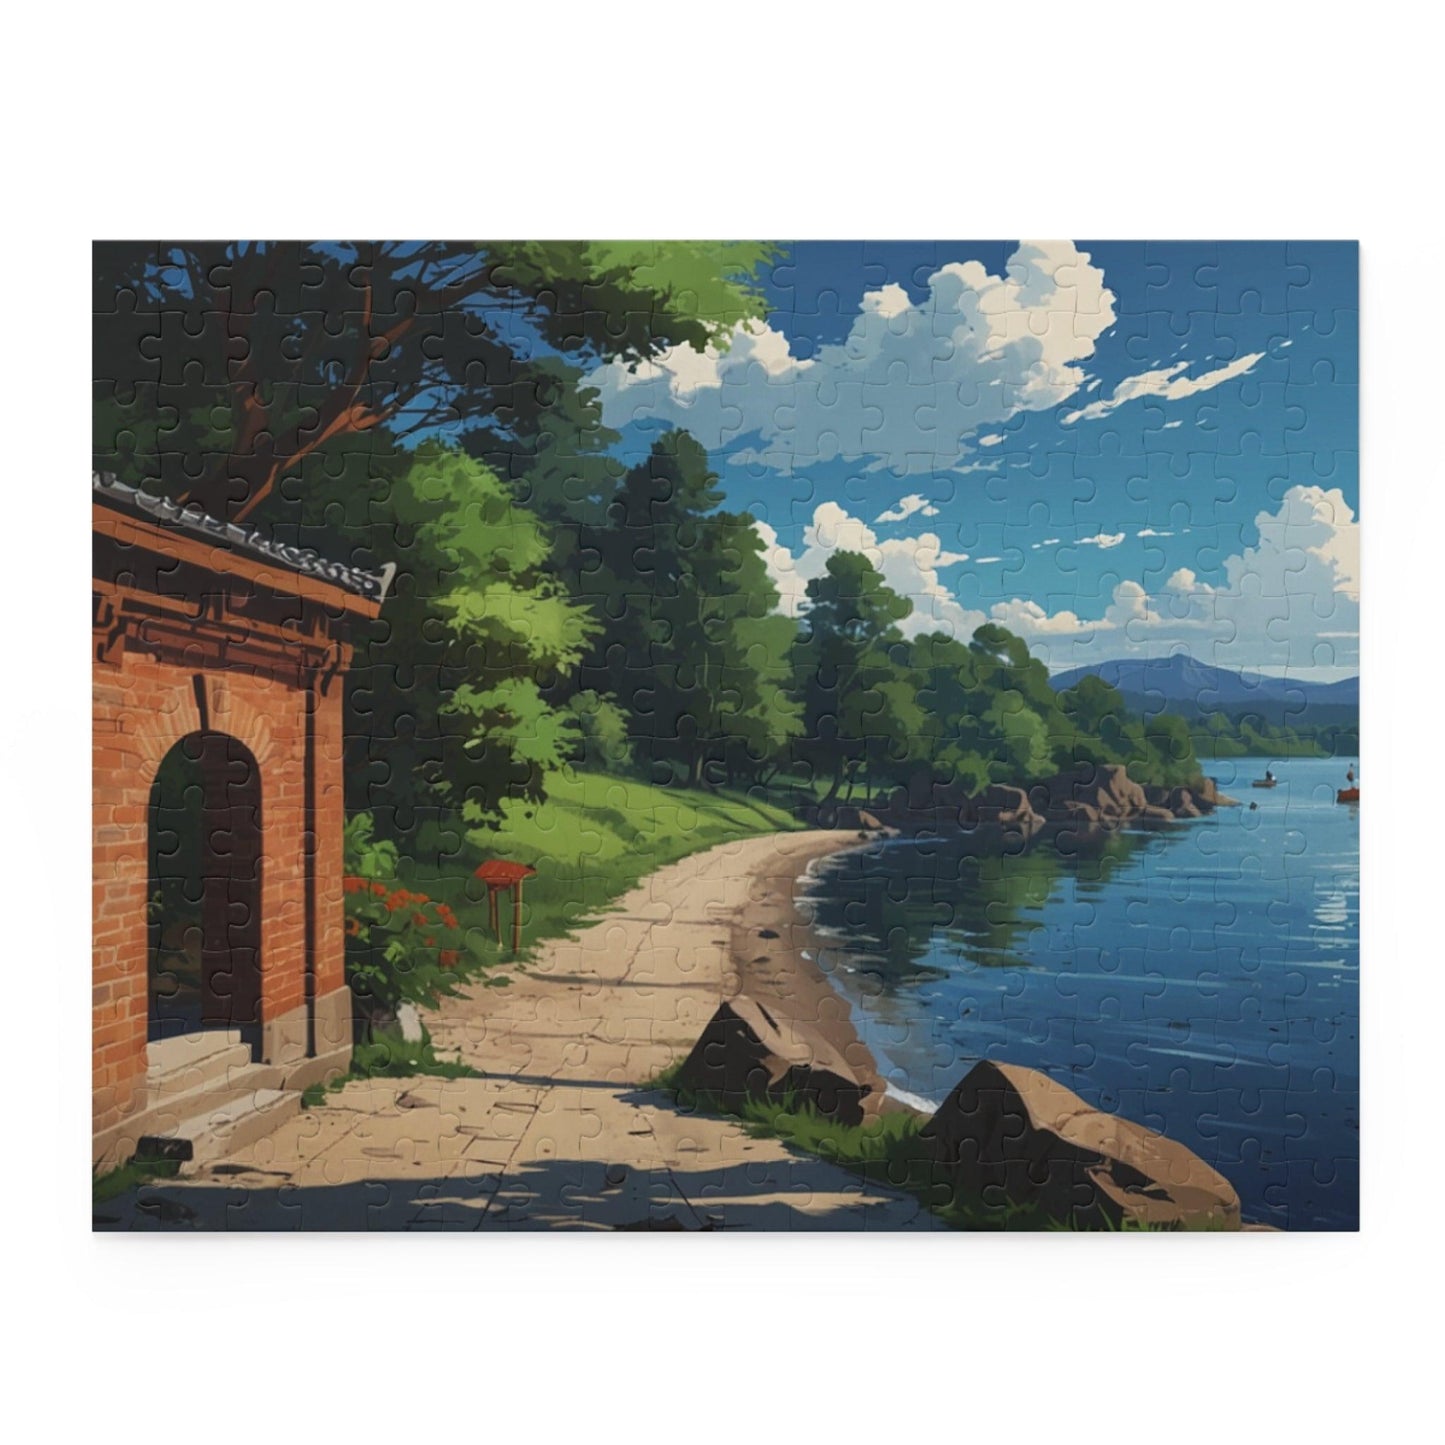 Lakeside Serenity Puzzle (120, 252, 500-Piece) - Puzzlers Paradise